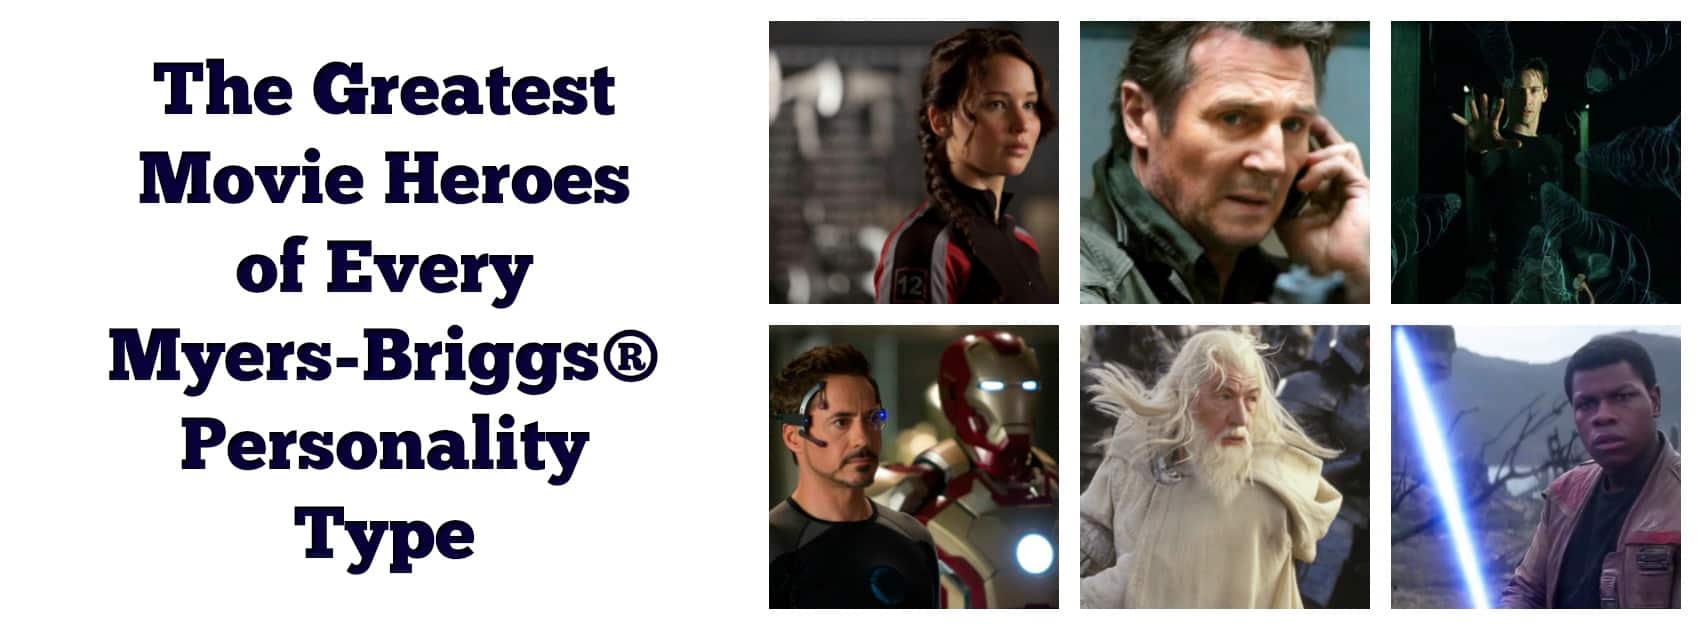 The Greatest Movie Heroes of Every Myers-Briggs® Personality Type -  Psychology Junkie